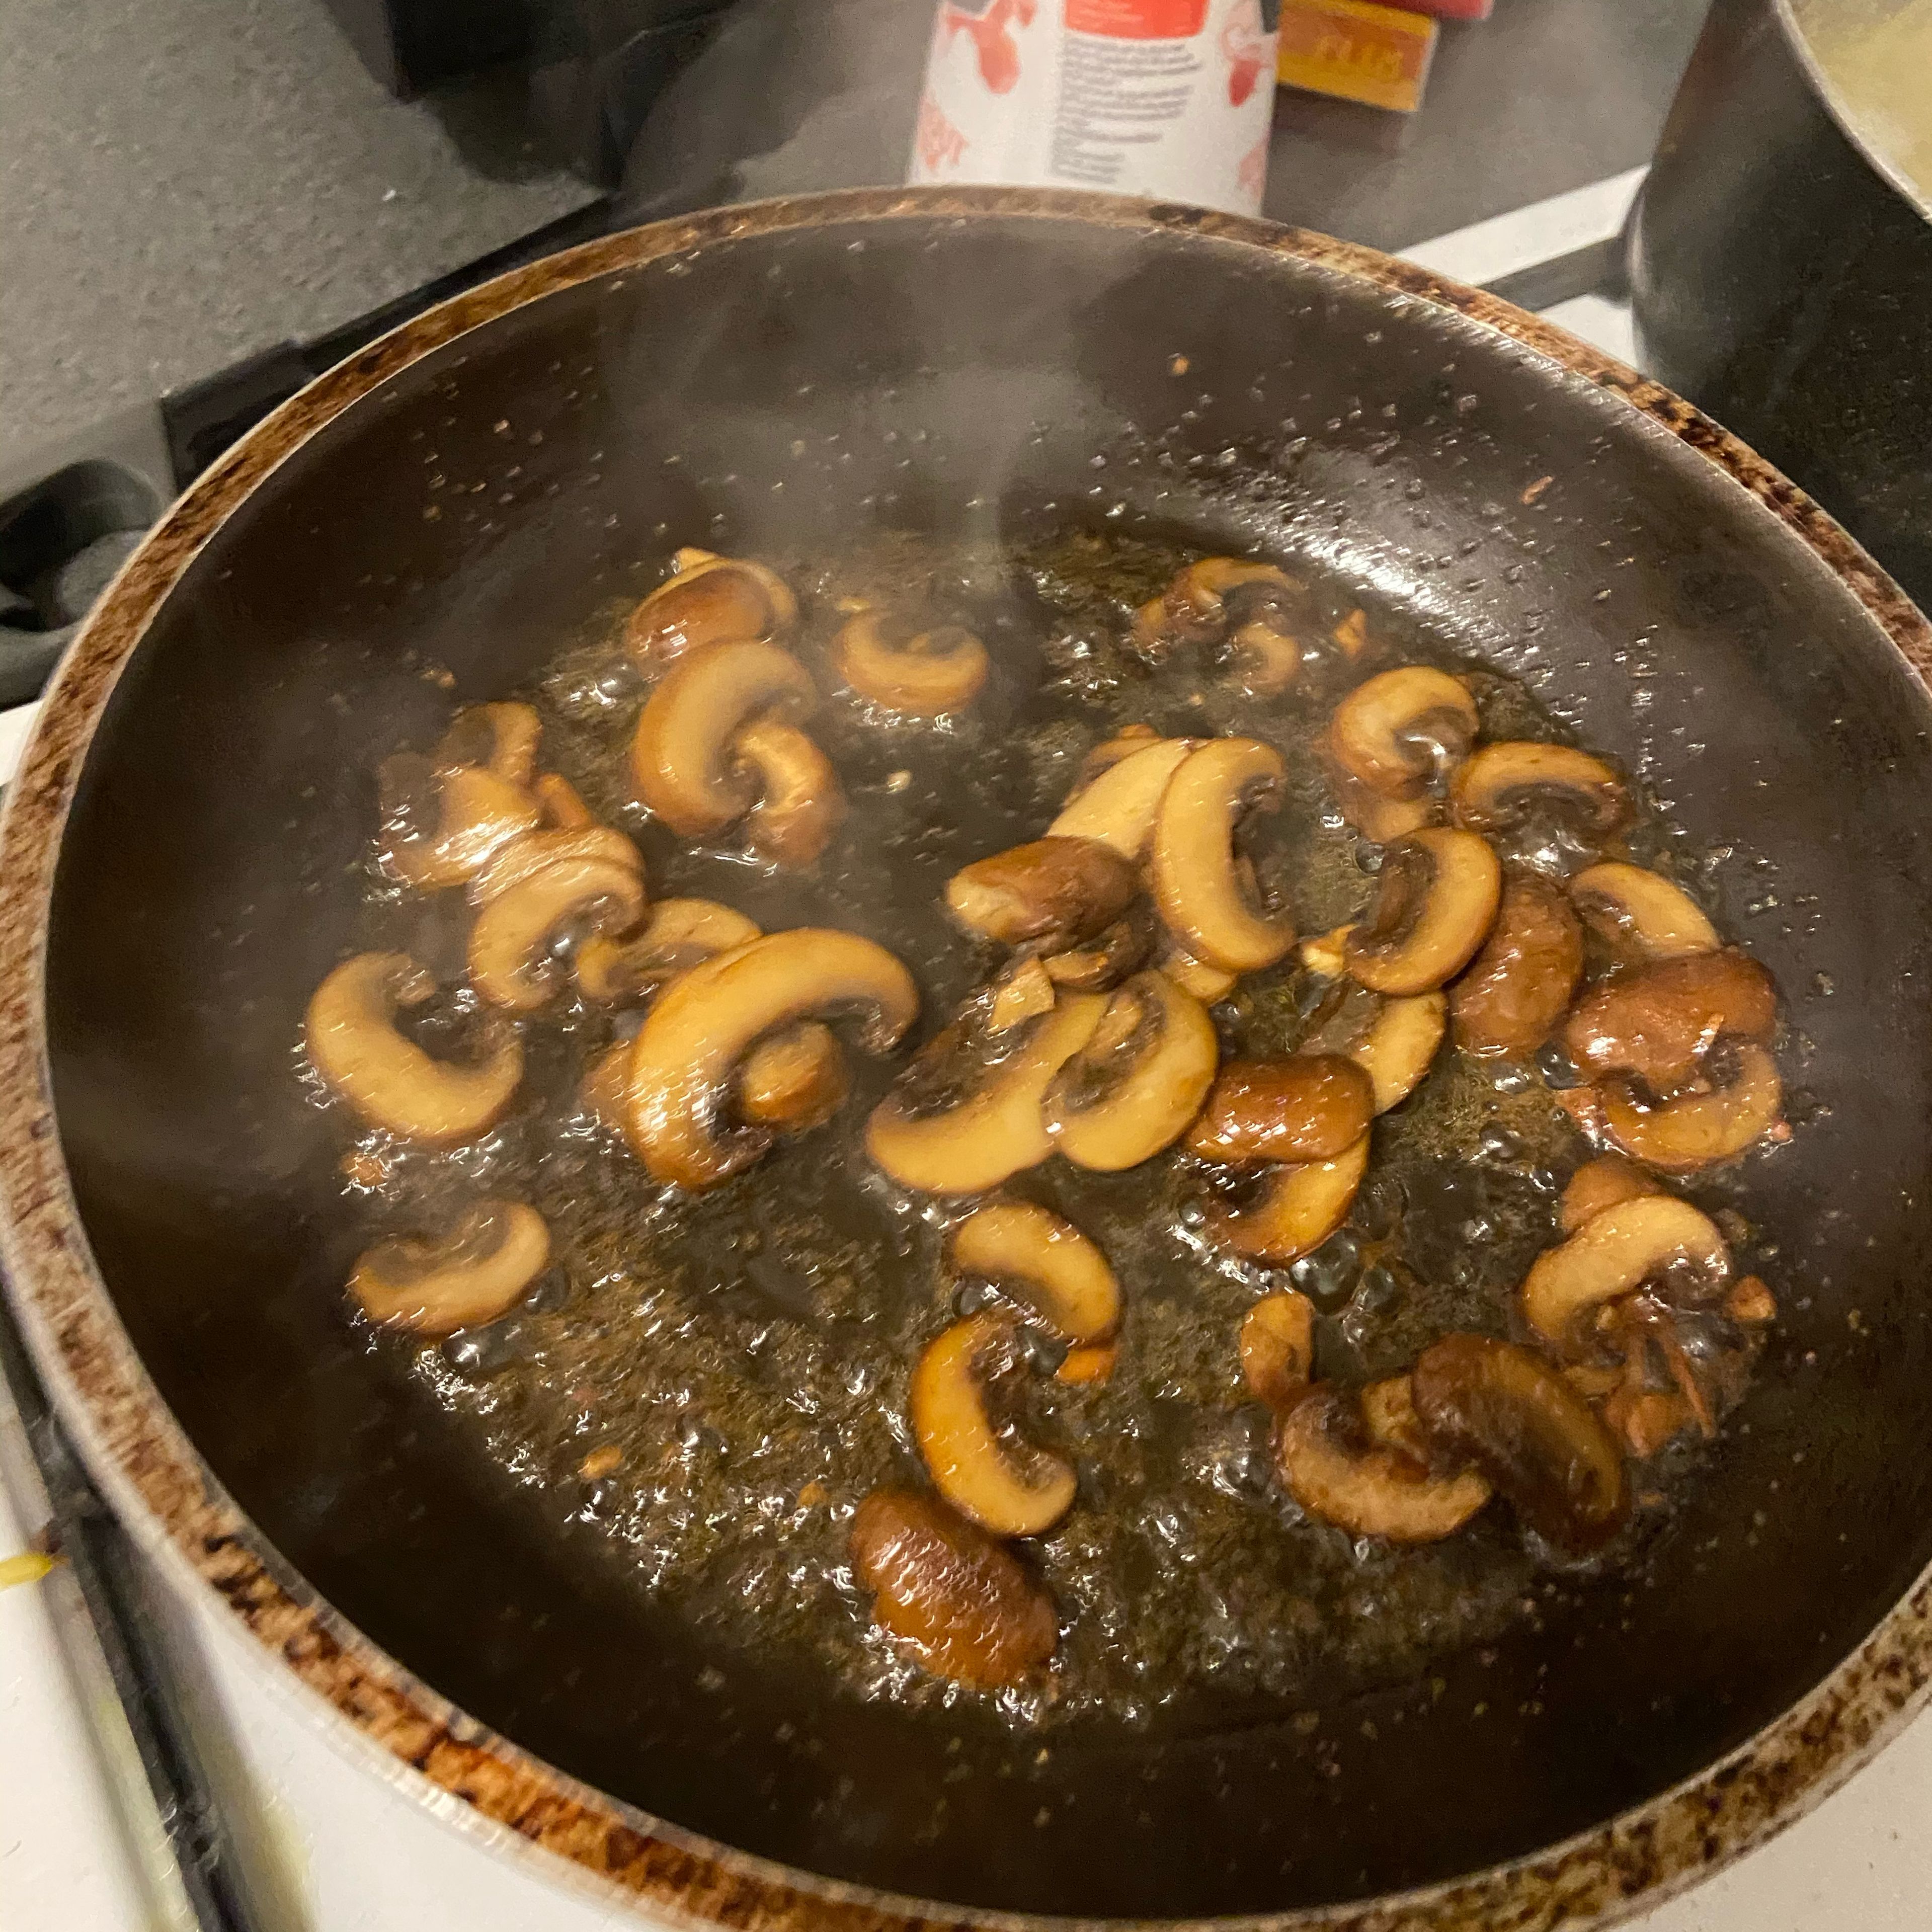 Meanwhile add the wine to the mushrooms and let the alcohol evaporate